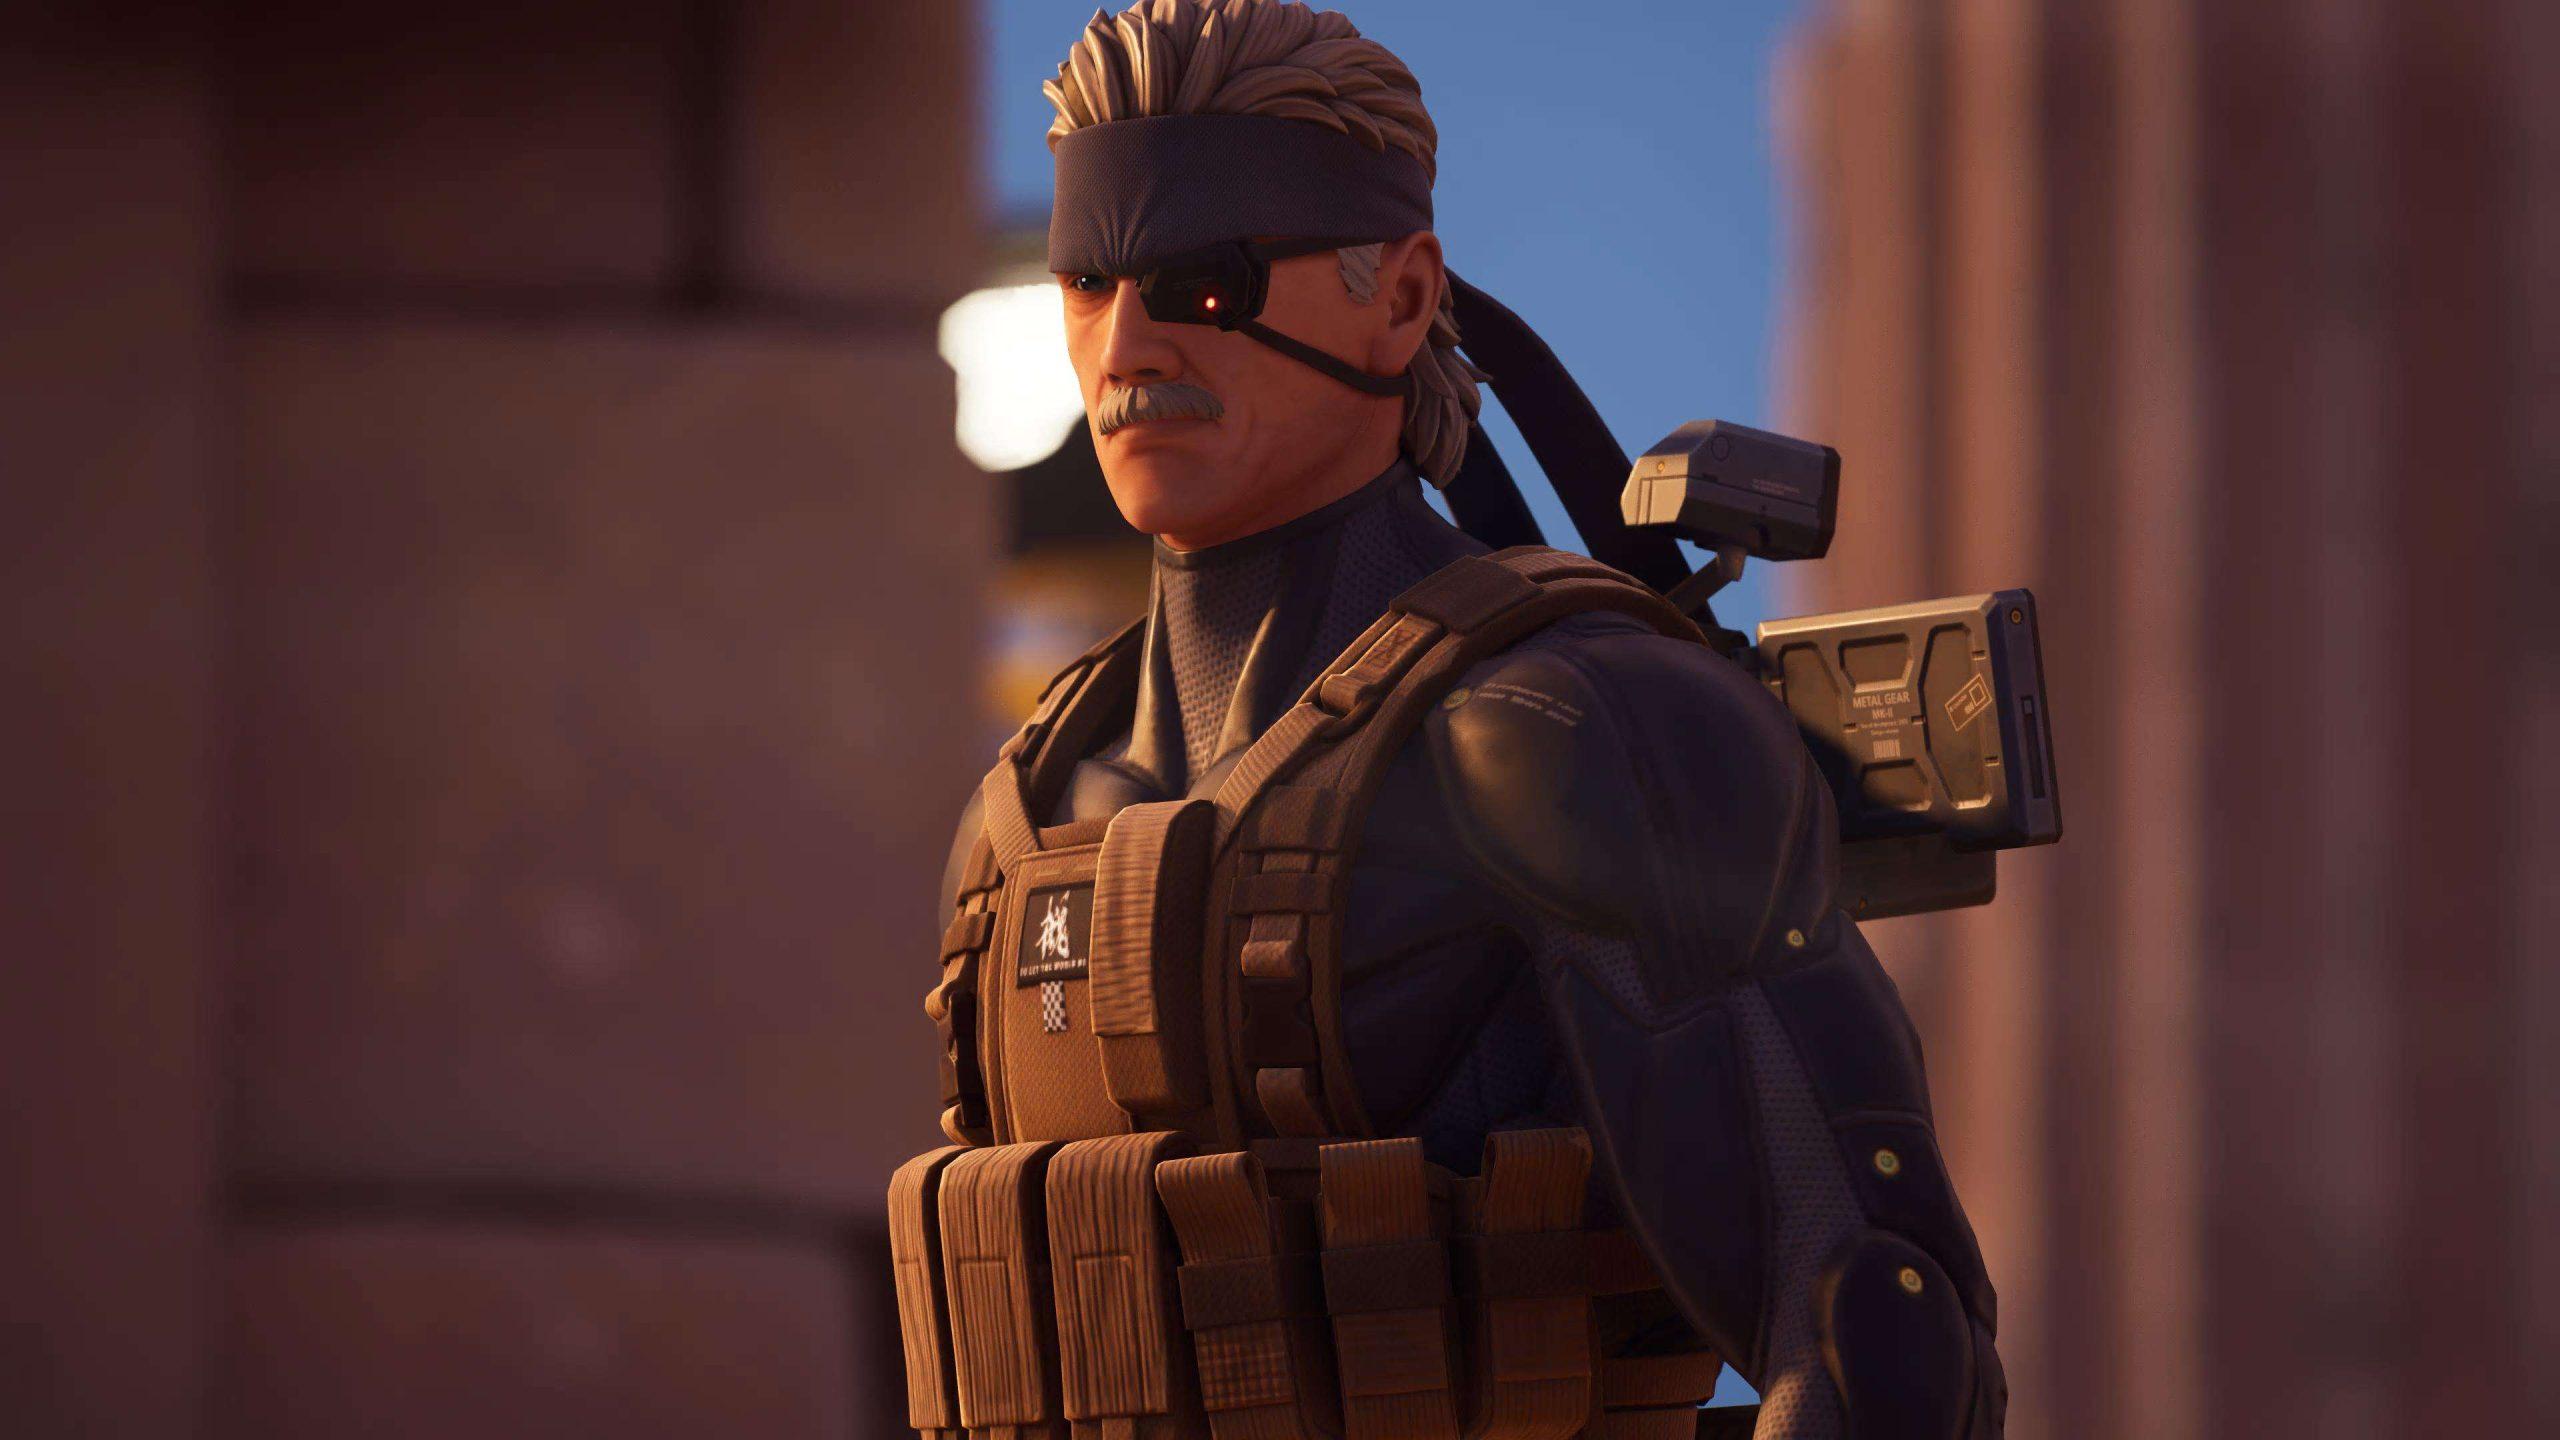 Fortnite Solid Snake Skin - Characters, Costumes, Skins & Outfits